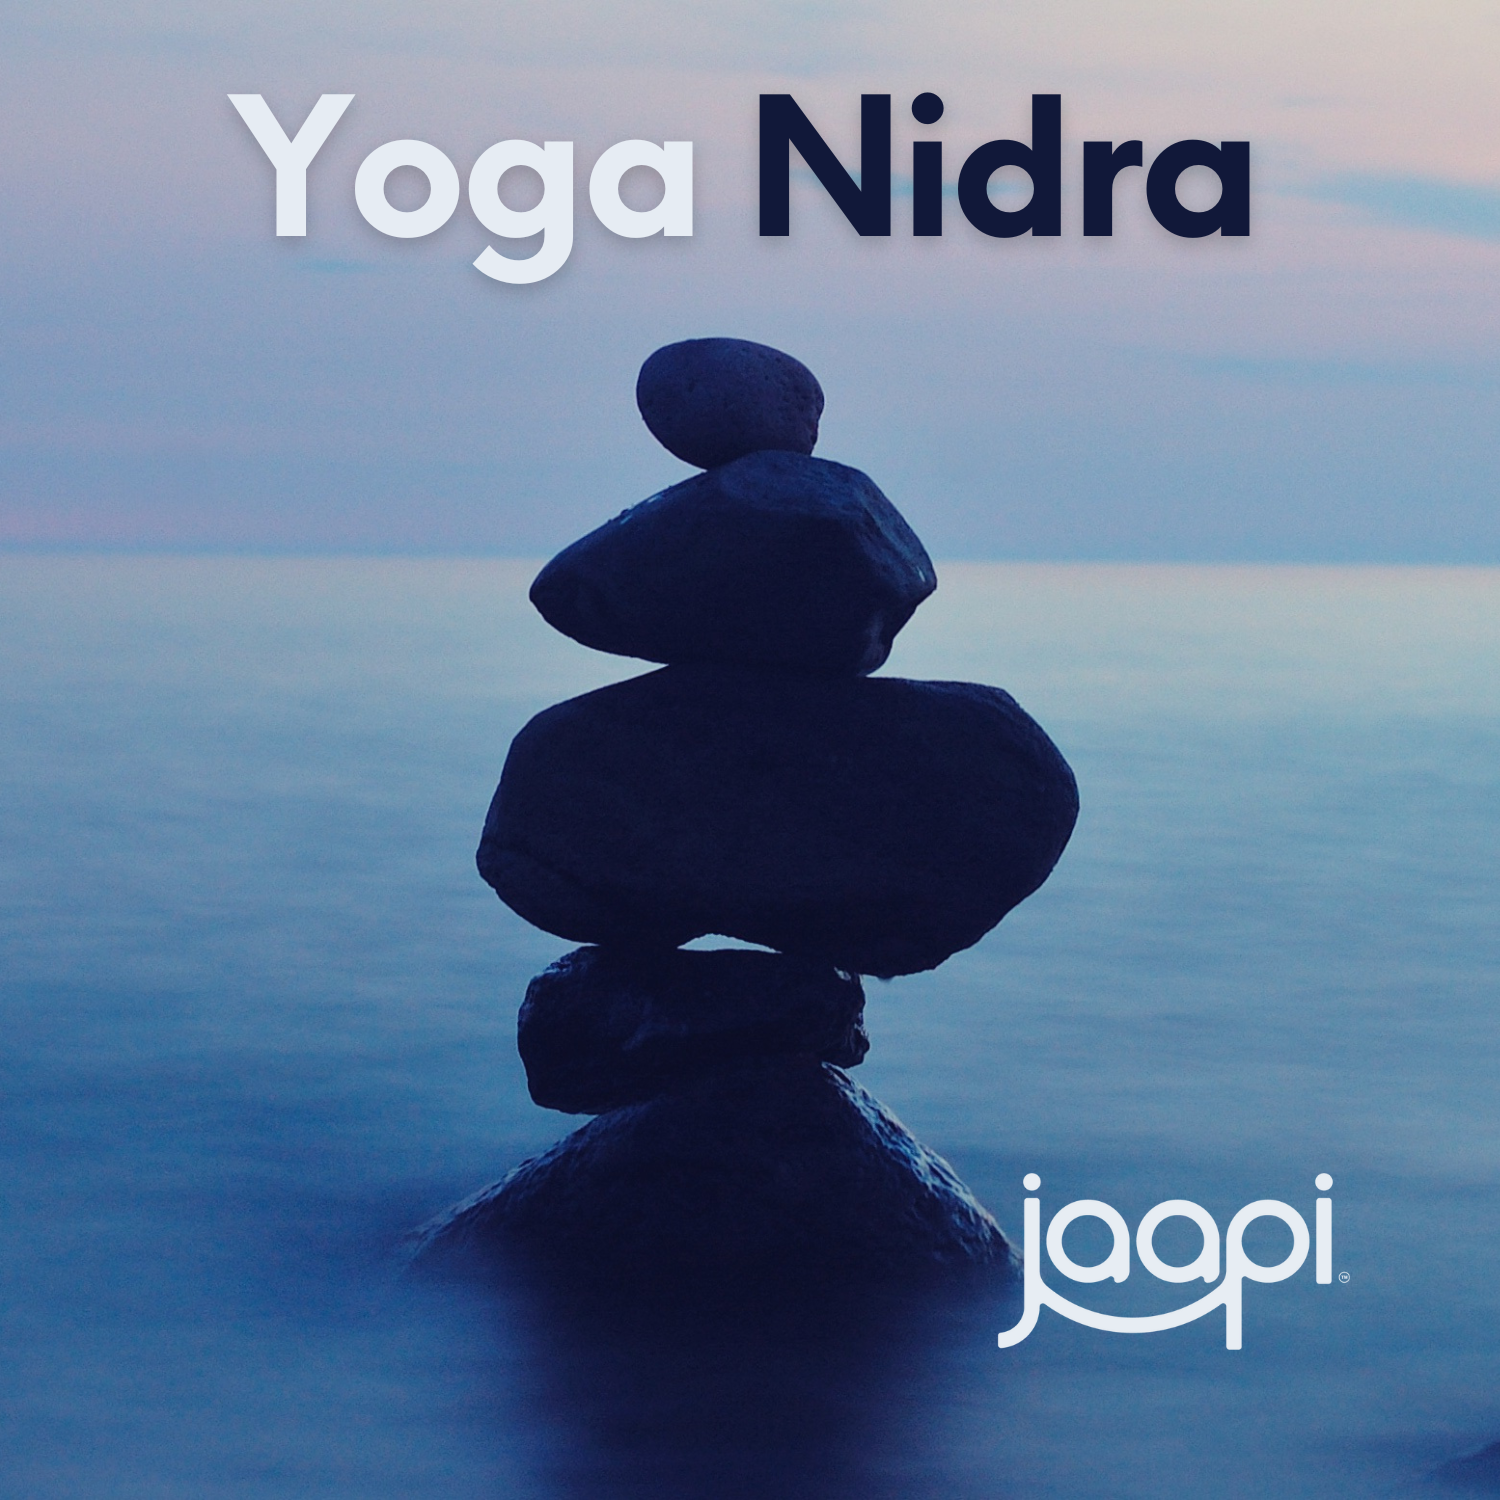 Yoga Nidra Music: Go Deeper Into Your Practice 🙏 High vibrational music for yoga and meditation. Curated by Jaapi Media.